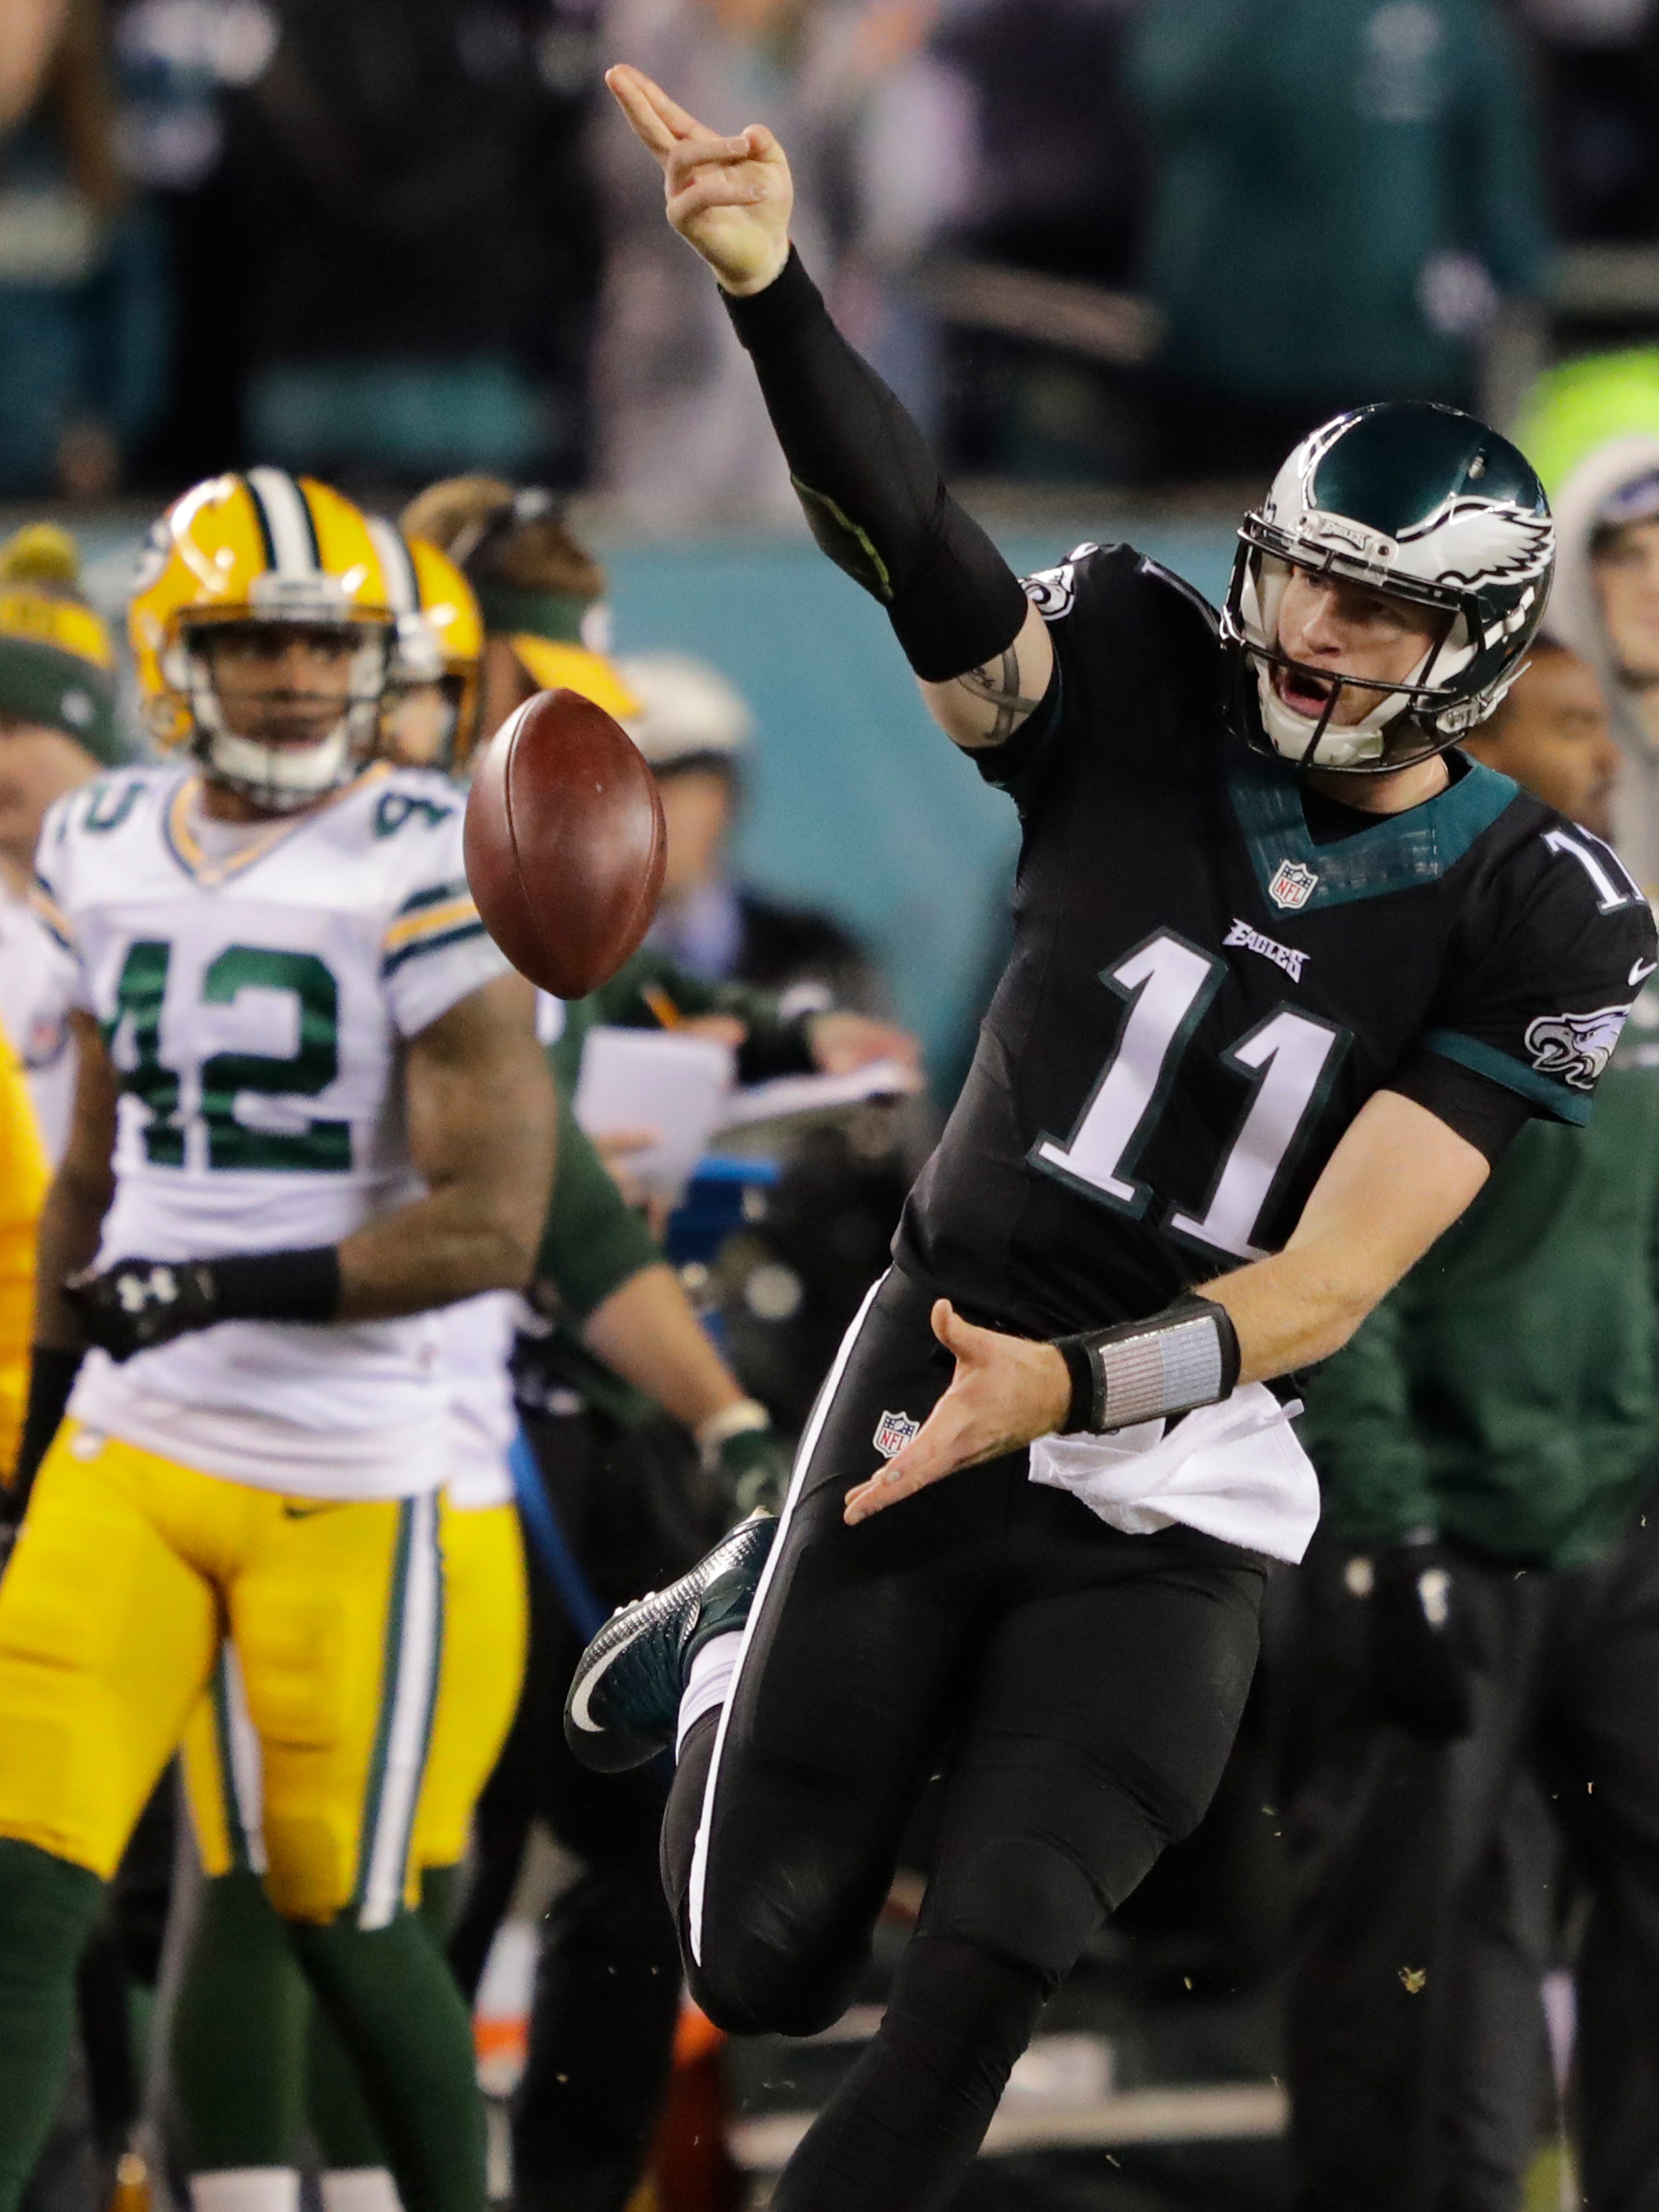 Philadelphia Eagles' Carson Wentz celebrates a long first down run late in the second quarter.

The Green Bay Packers play against the Philadelphia Eagles Monday, November 28, 2016, at Lincoln Financial Field in Philadelphia, Pa.